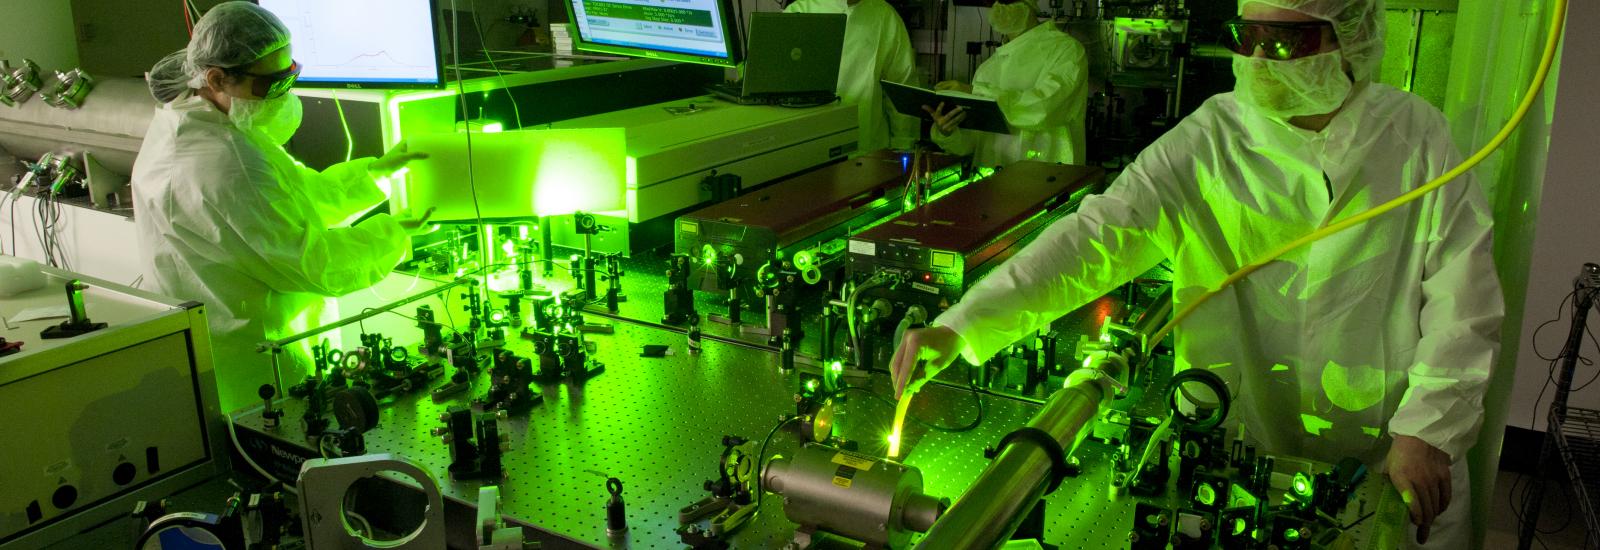 Physicists working in laser lab illuminated by green laser scatter